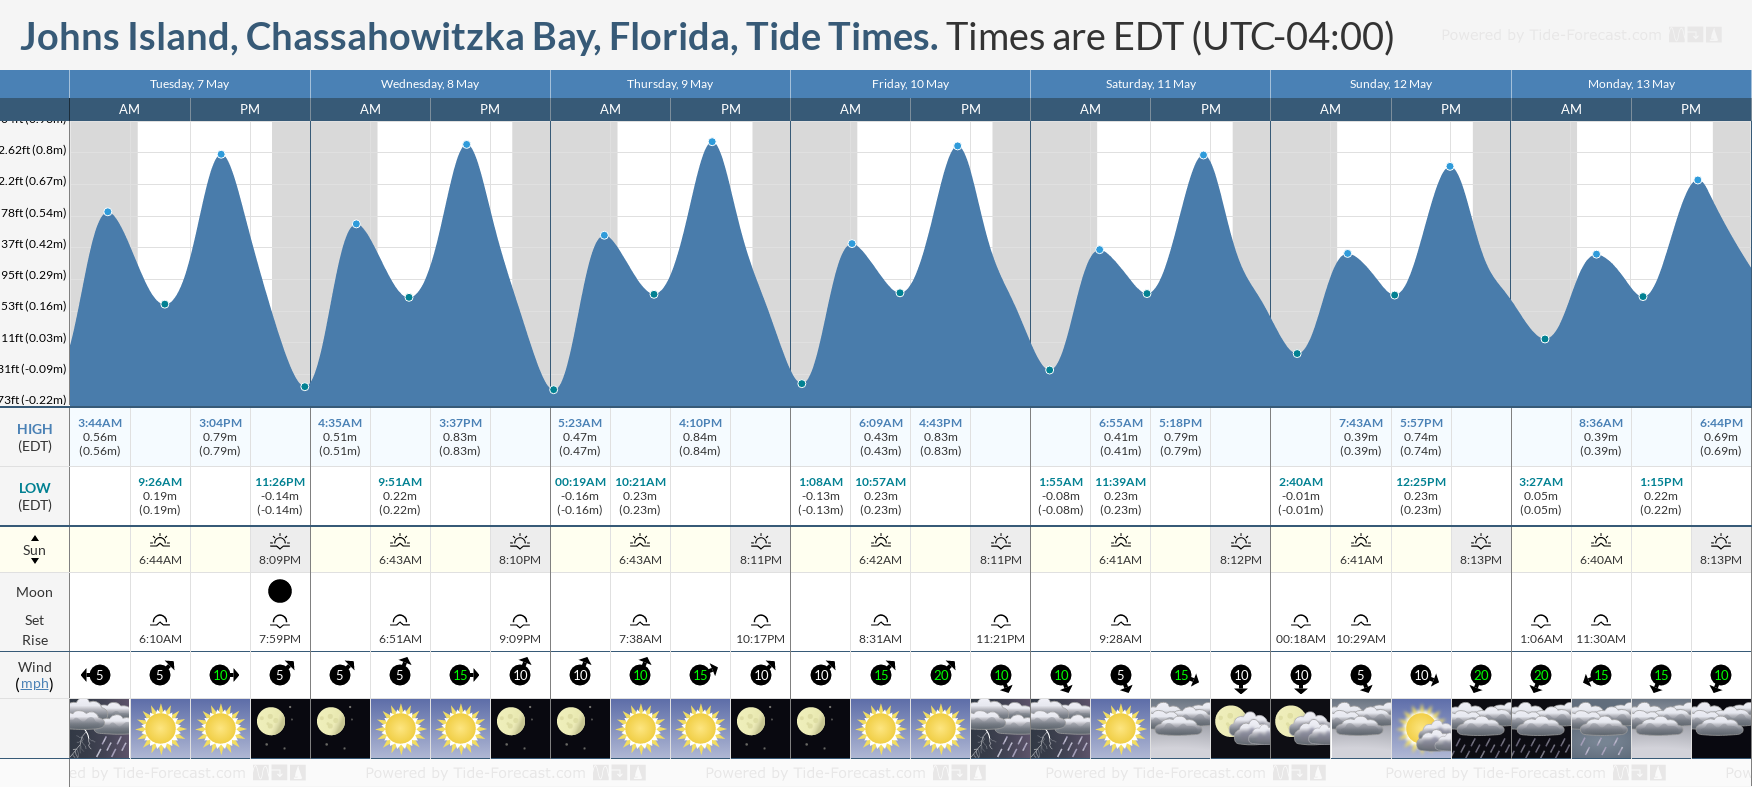 Johns Island, Chassahowitzka Bay, Florida Tide Chart including high and low tide tide times for the next 7 days